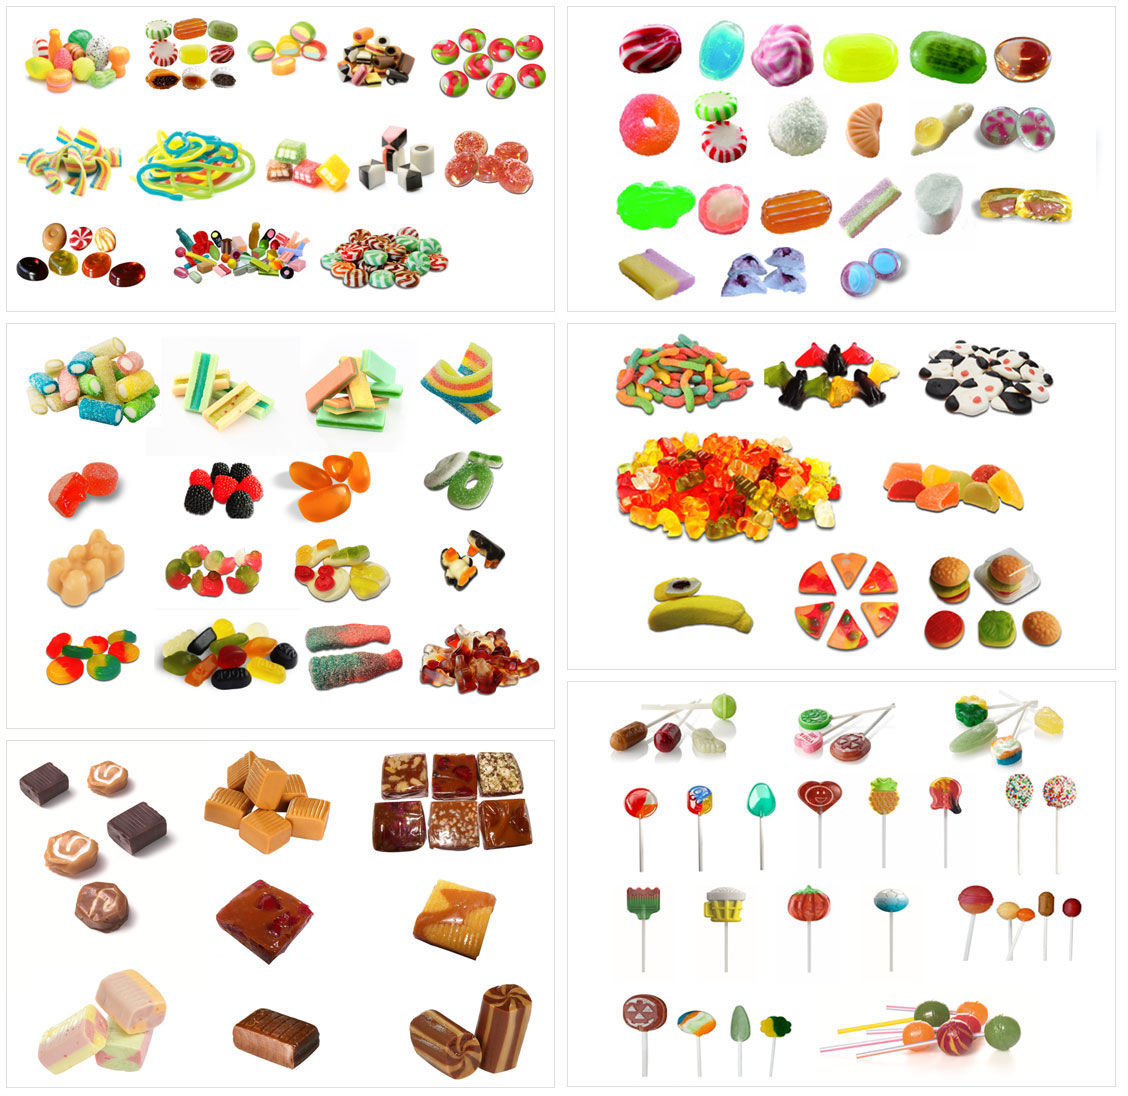 confectionery-food-1.jpg